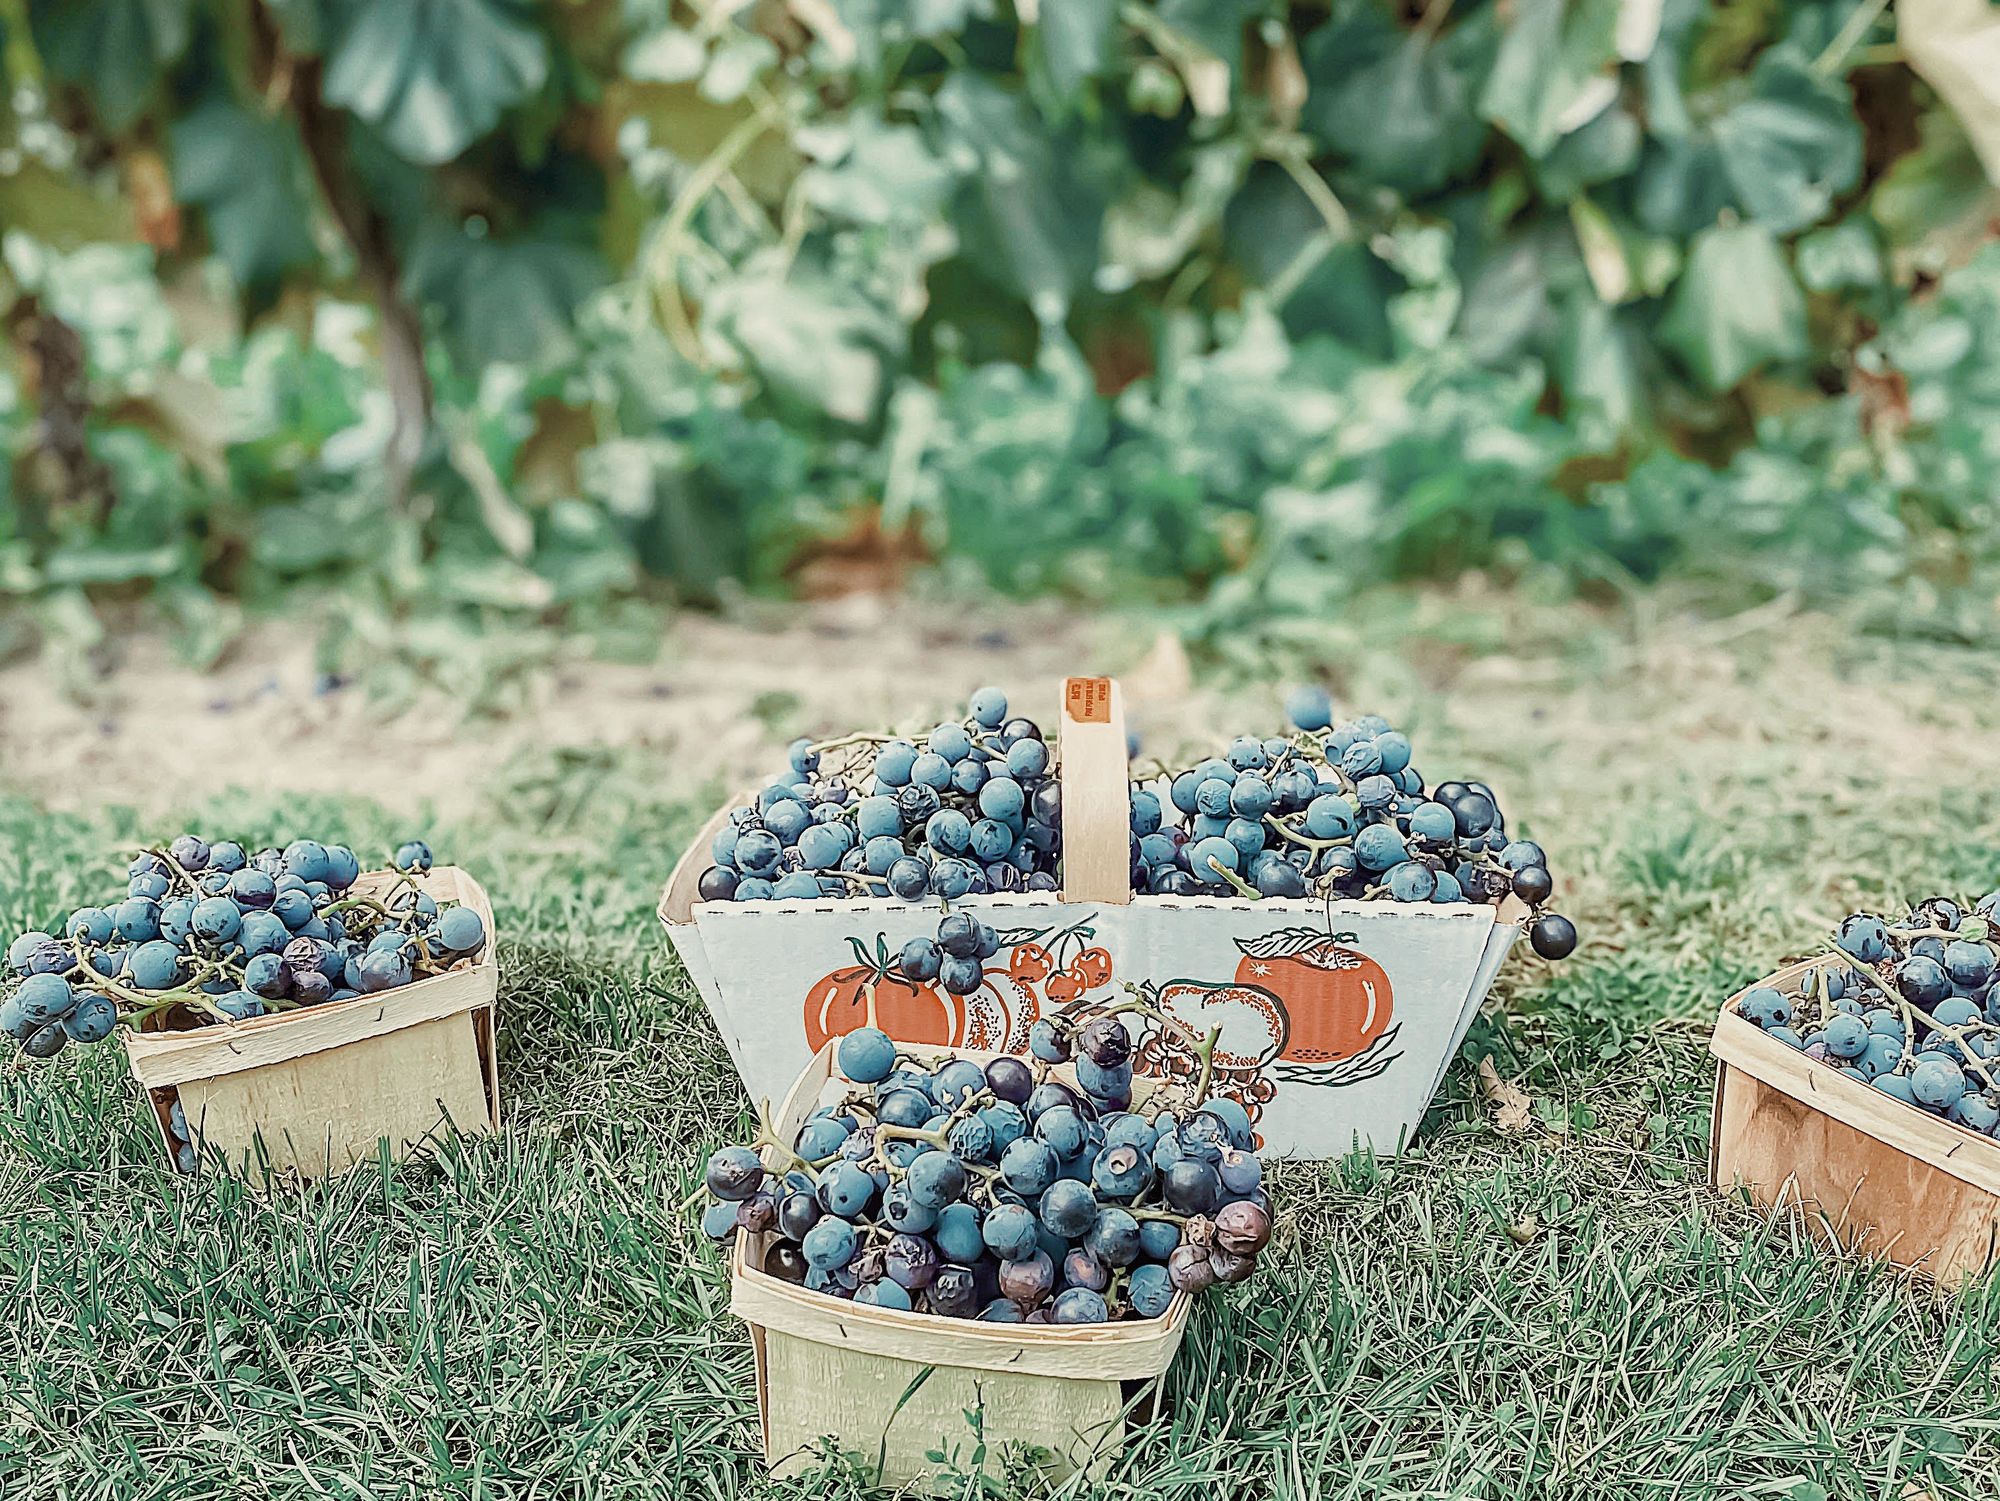 concord grapes are deep purple with a thick skin